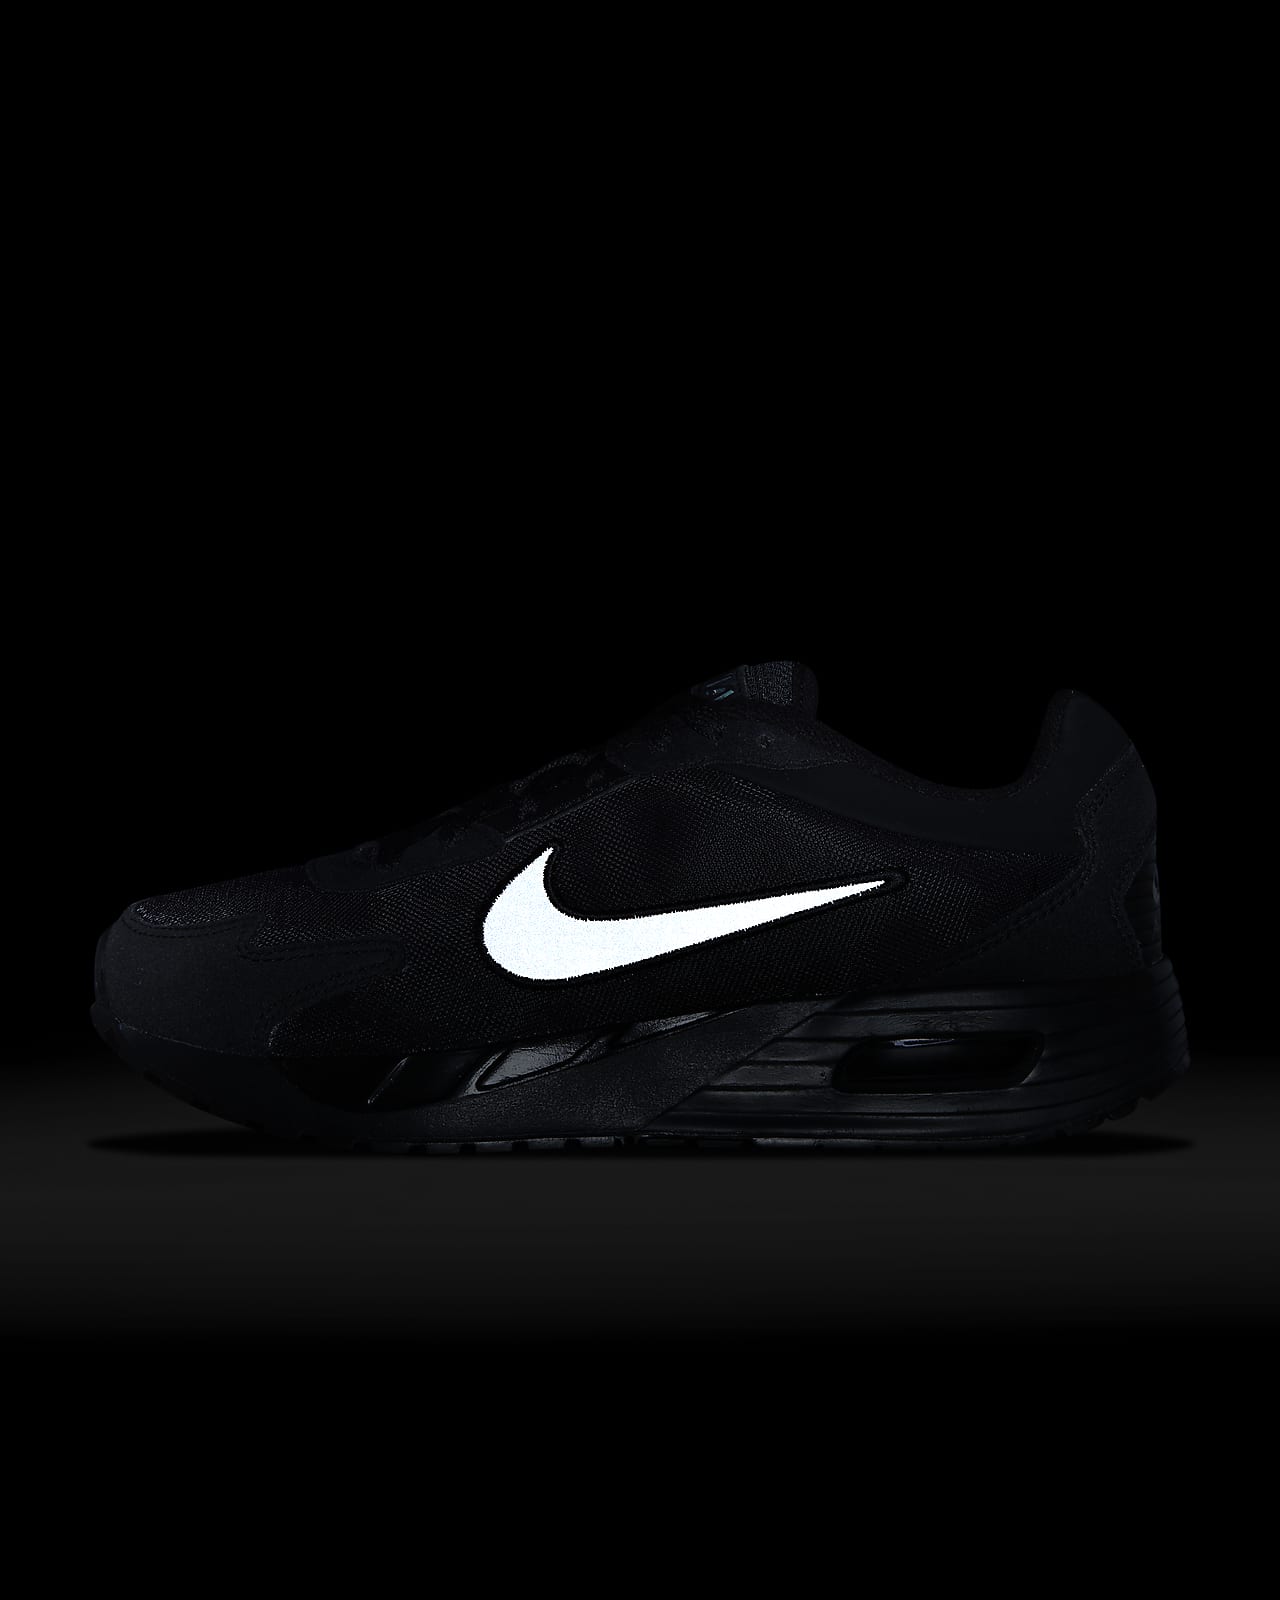 Nike Air Max Solo Women's Shoes